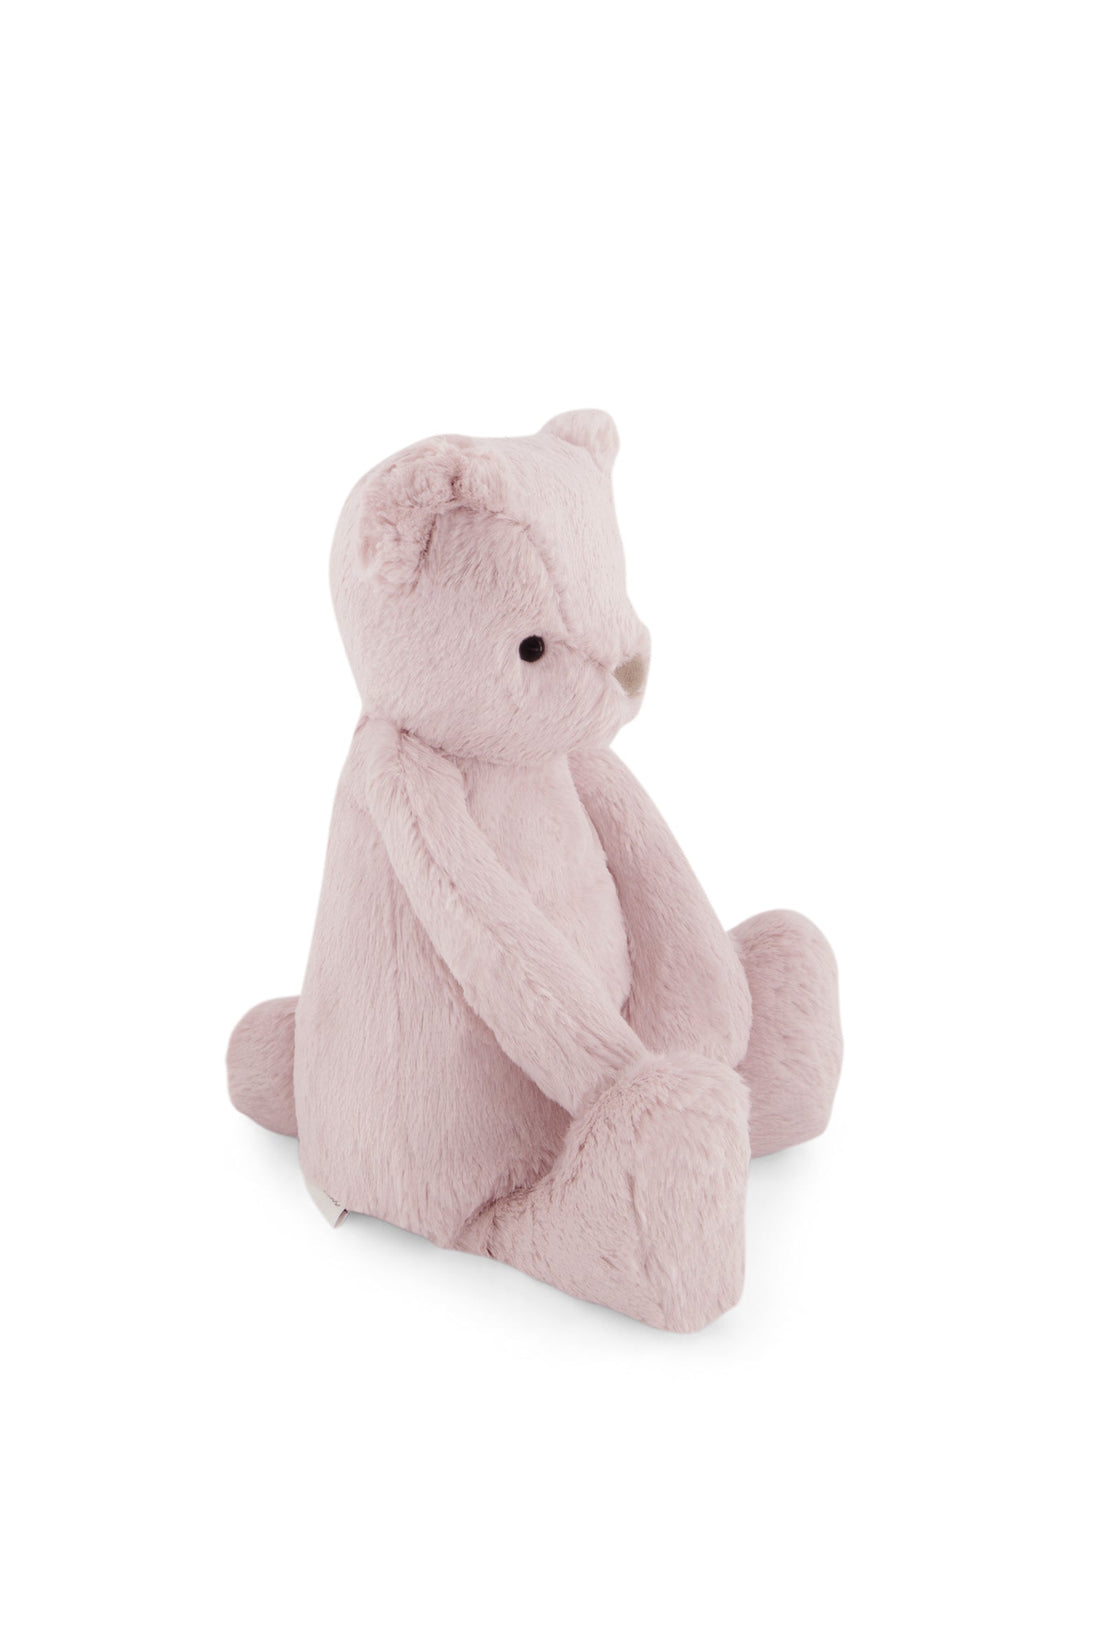 Snuggle Bunnies - George the Bear - Blossom Childrens Toy from Jamie Kay USA